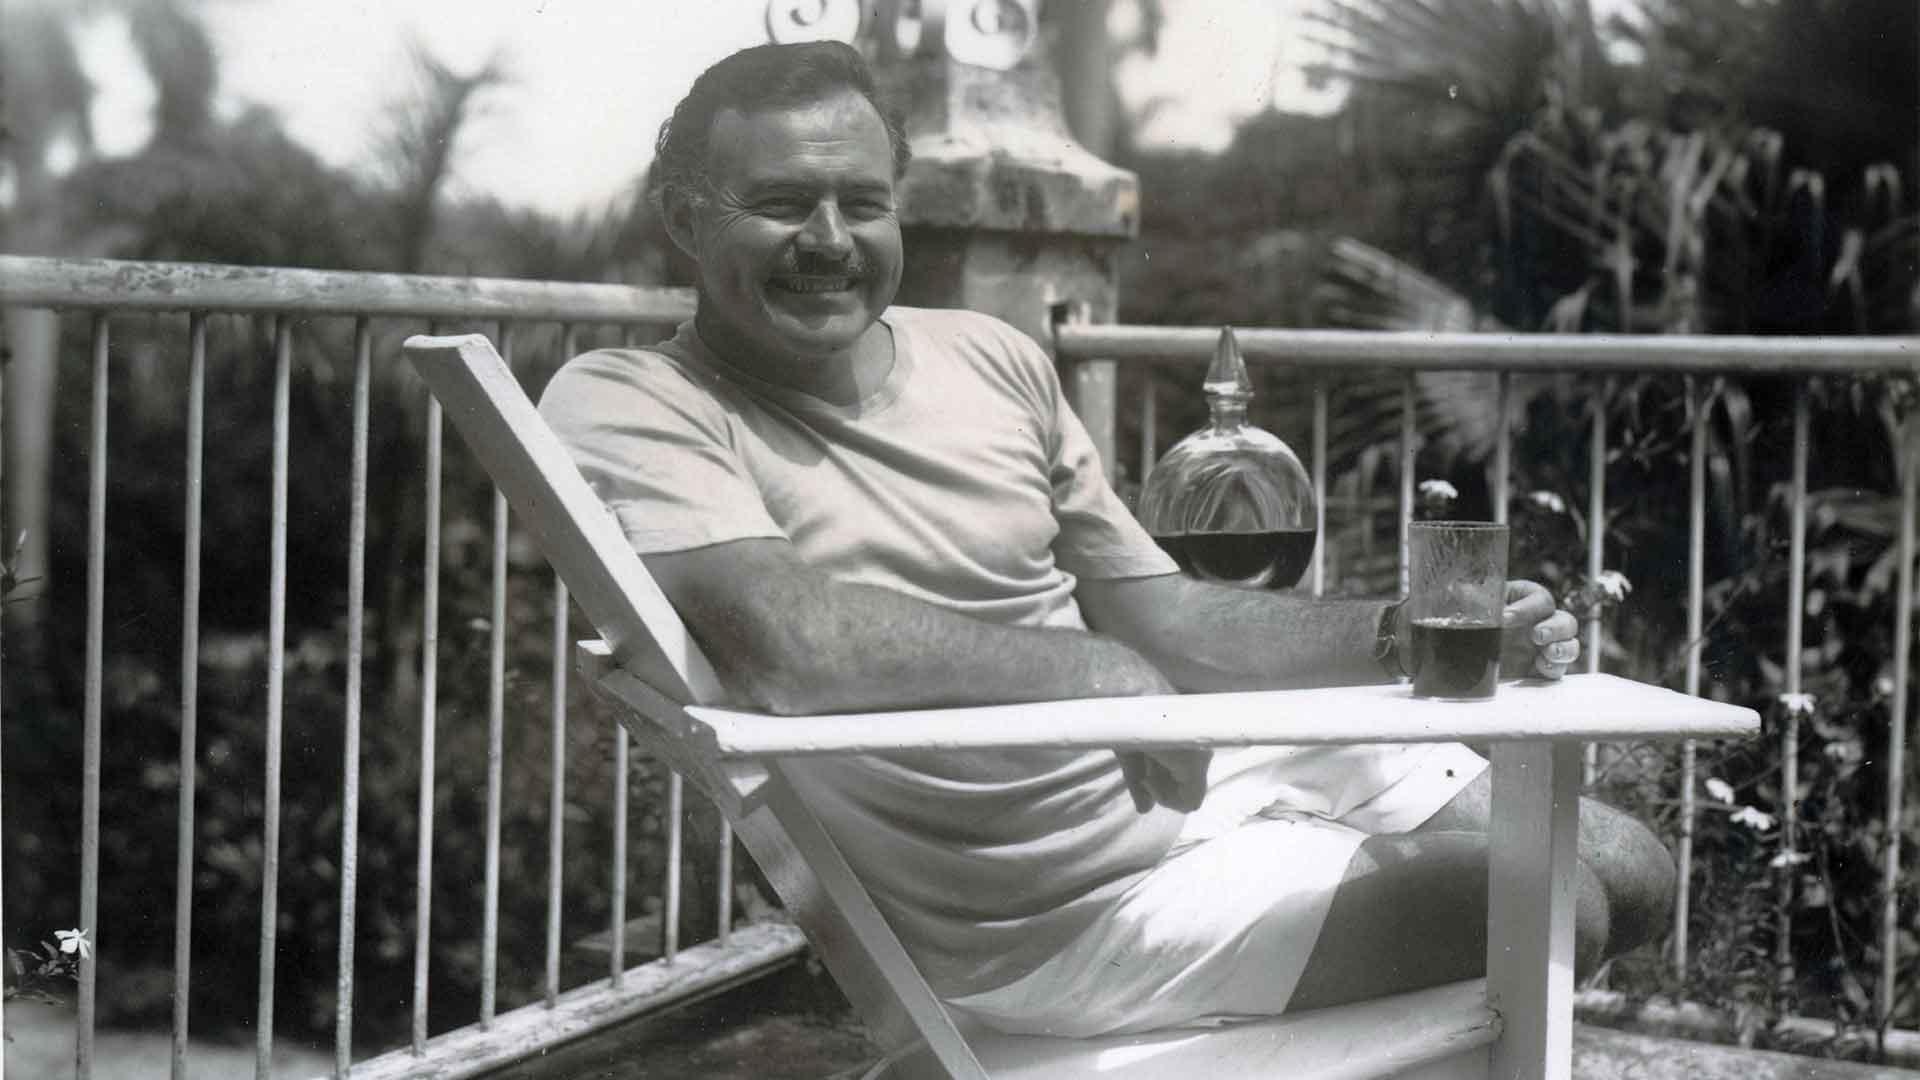 University warns students Ernest Hemingway's Old Man and the Sea contains  graphic scenes of FISHING